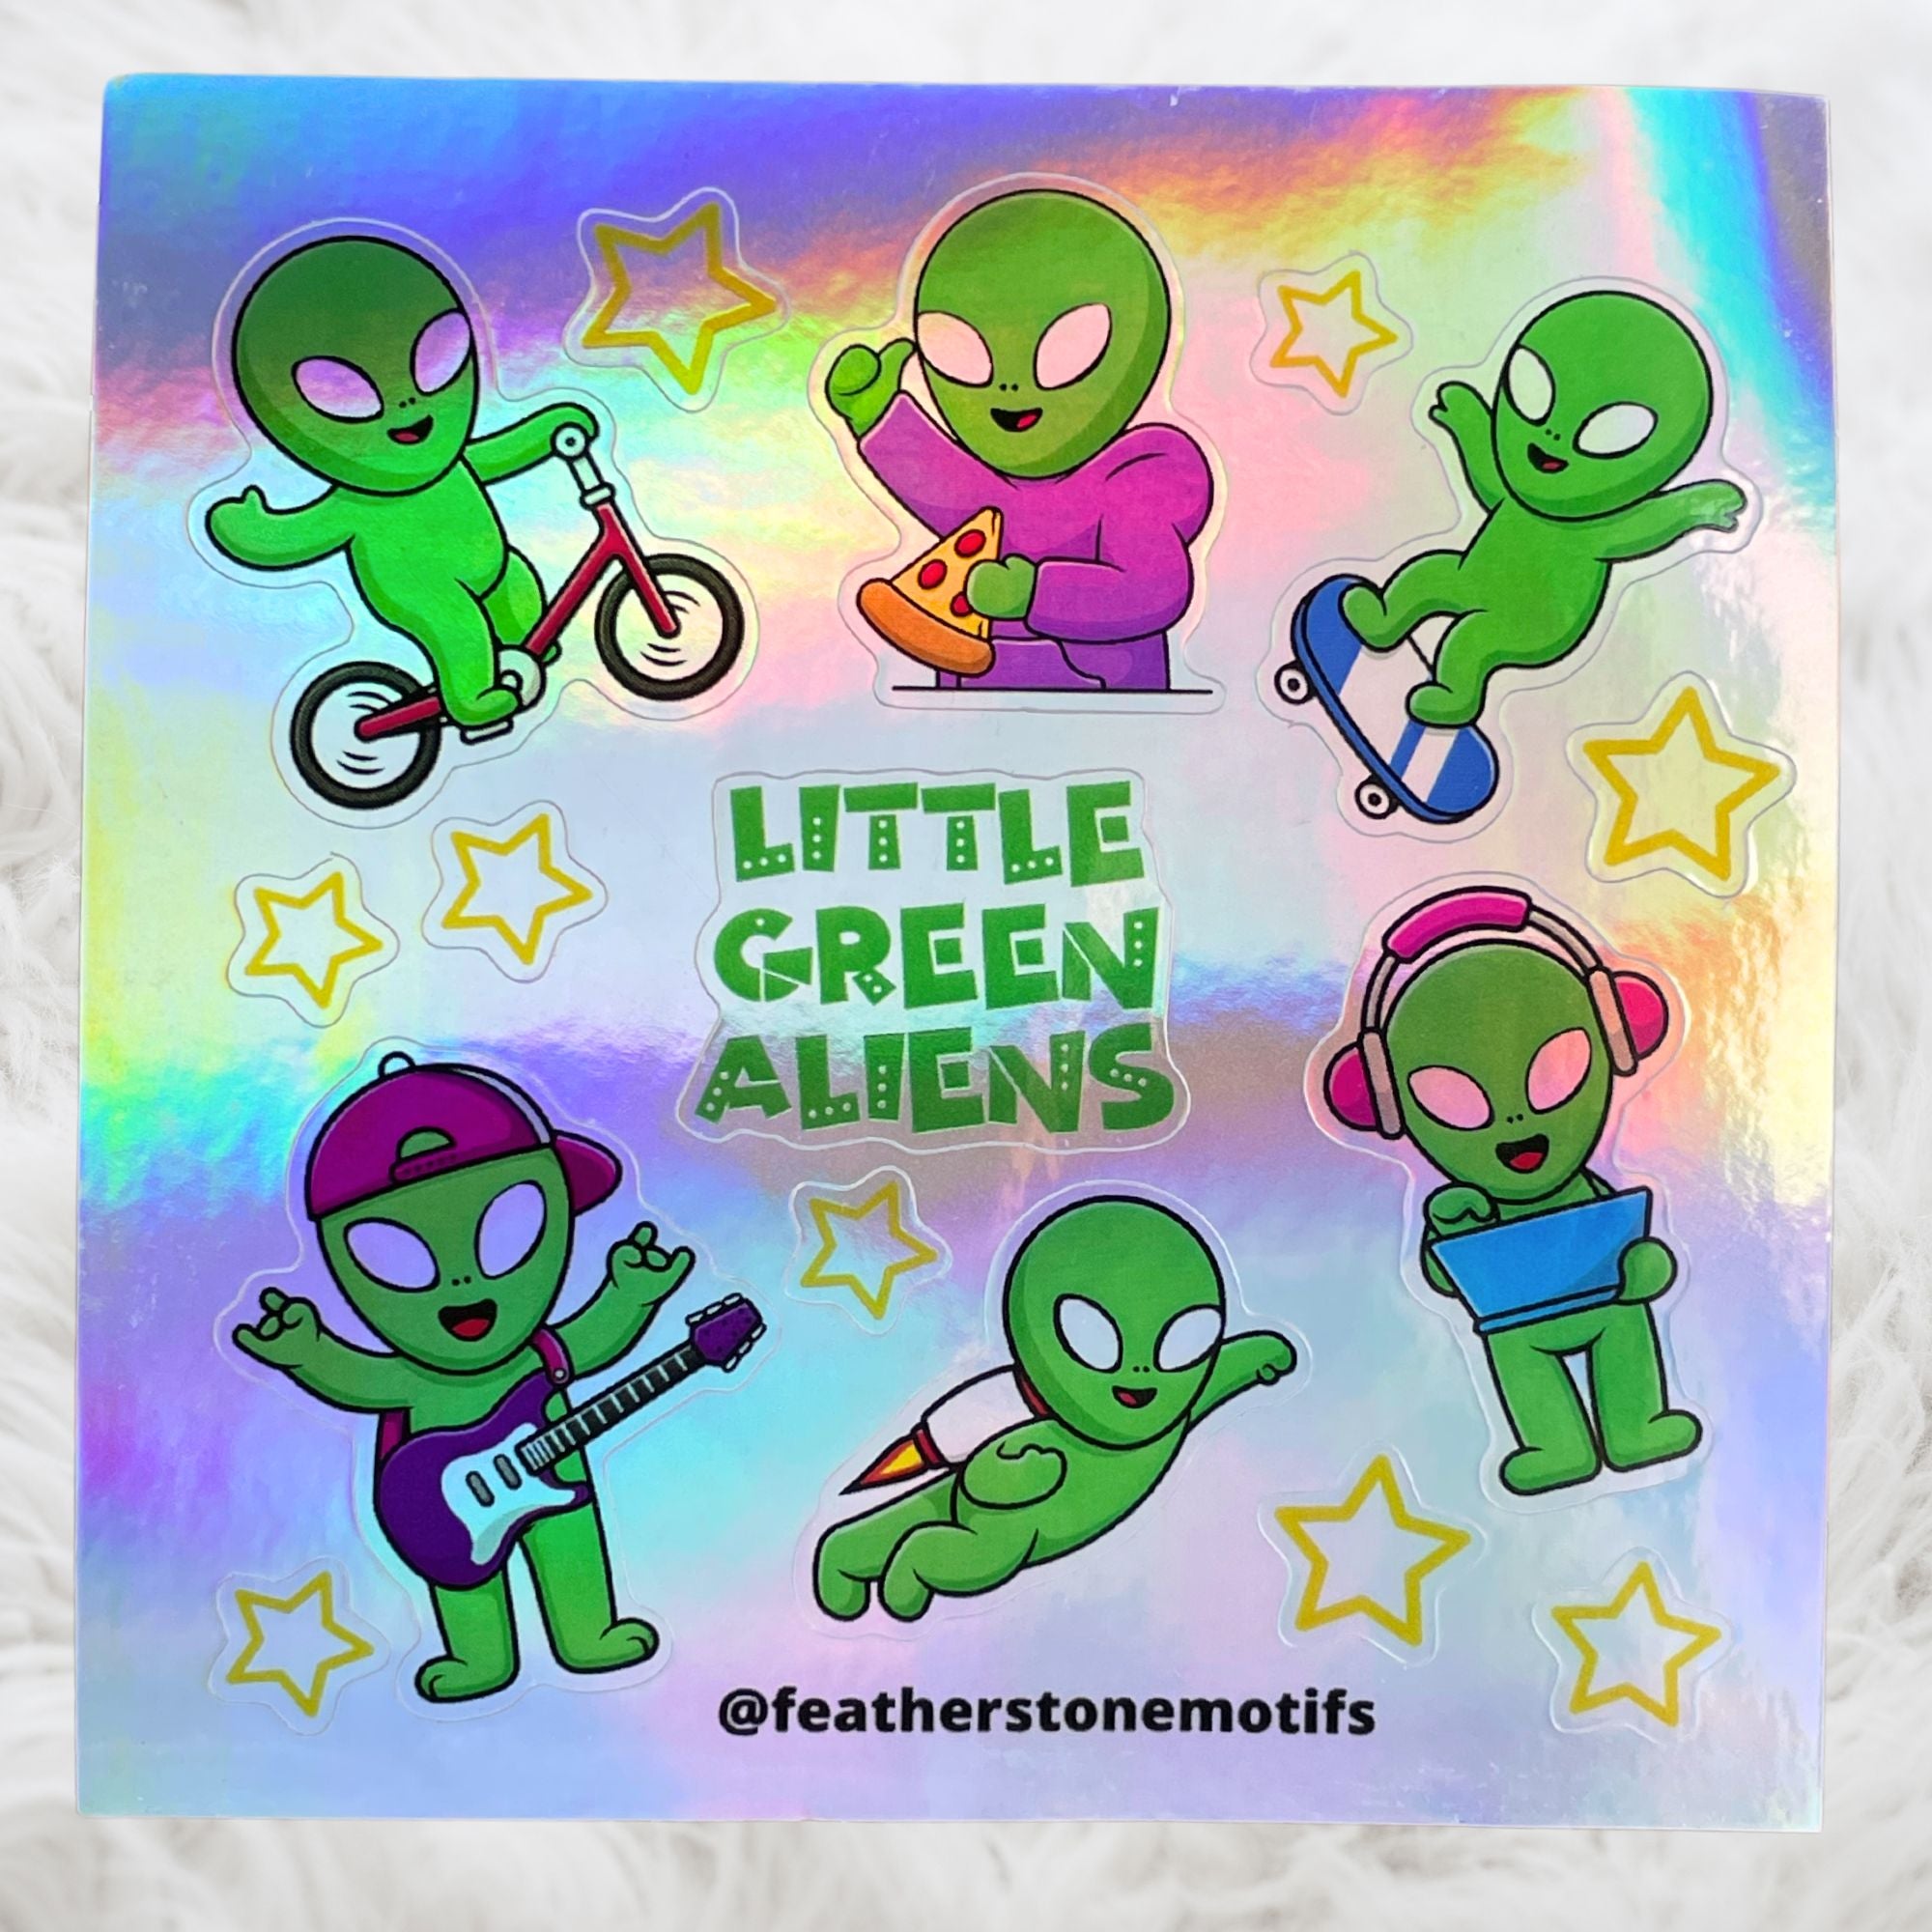 This image shows the Little Green Aliens holographic mini sheet